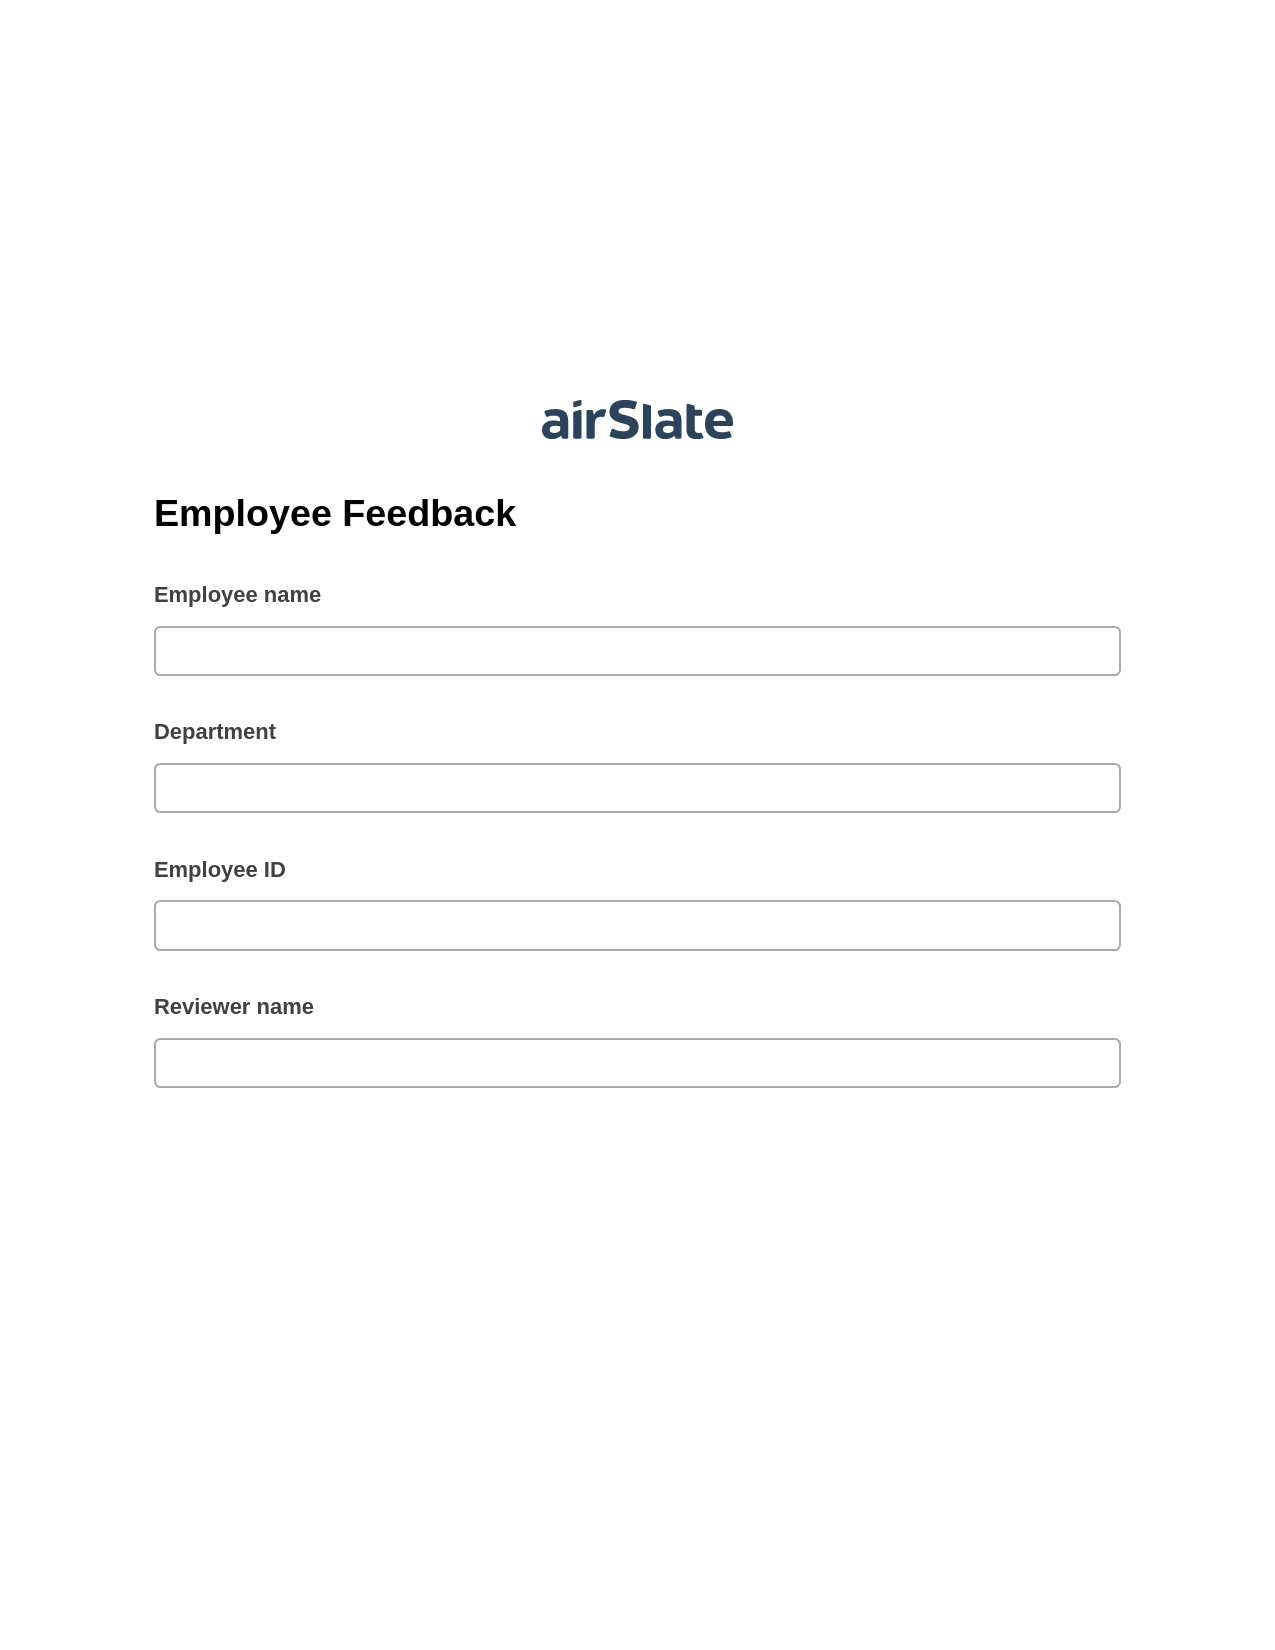 Employee Feedback Pre-fill from Google Sheet Dropdown Options Bot, Update NetSuite Records Bot, Email Notification Postfinish Bot